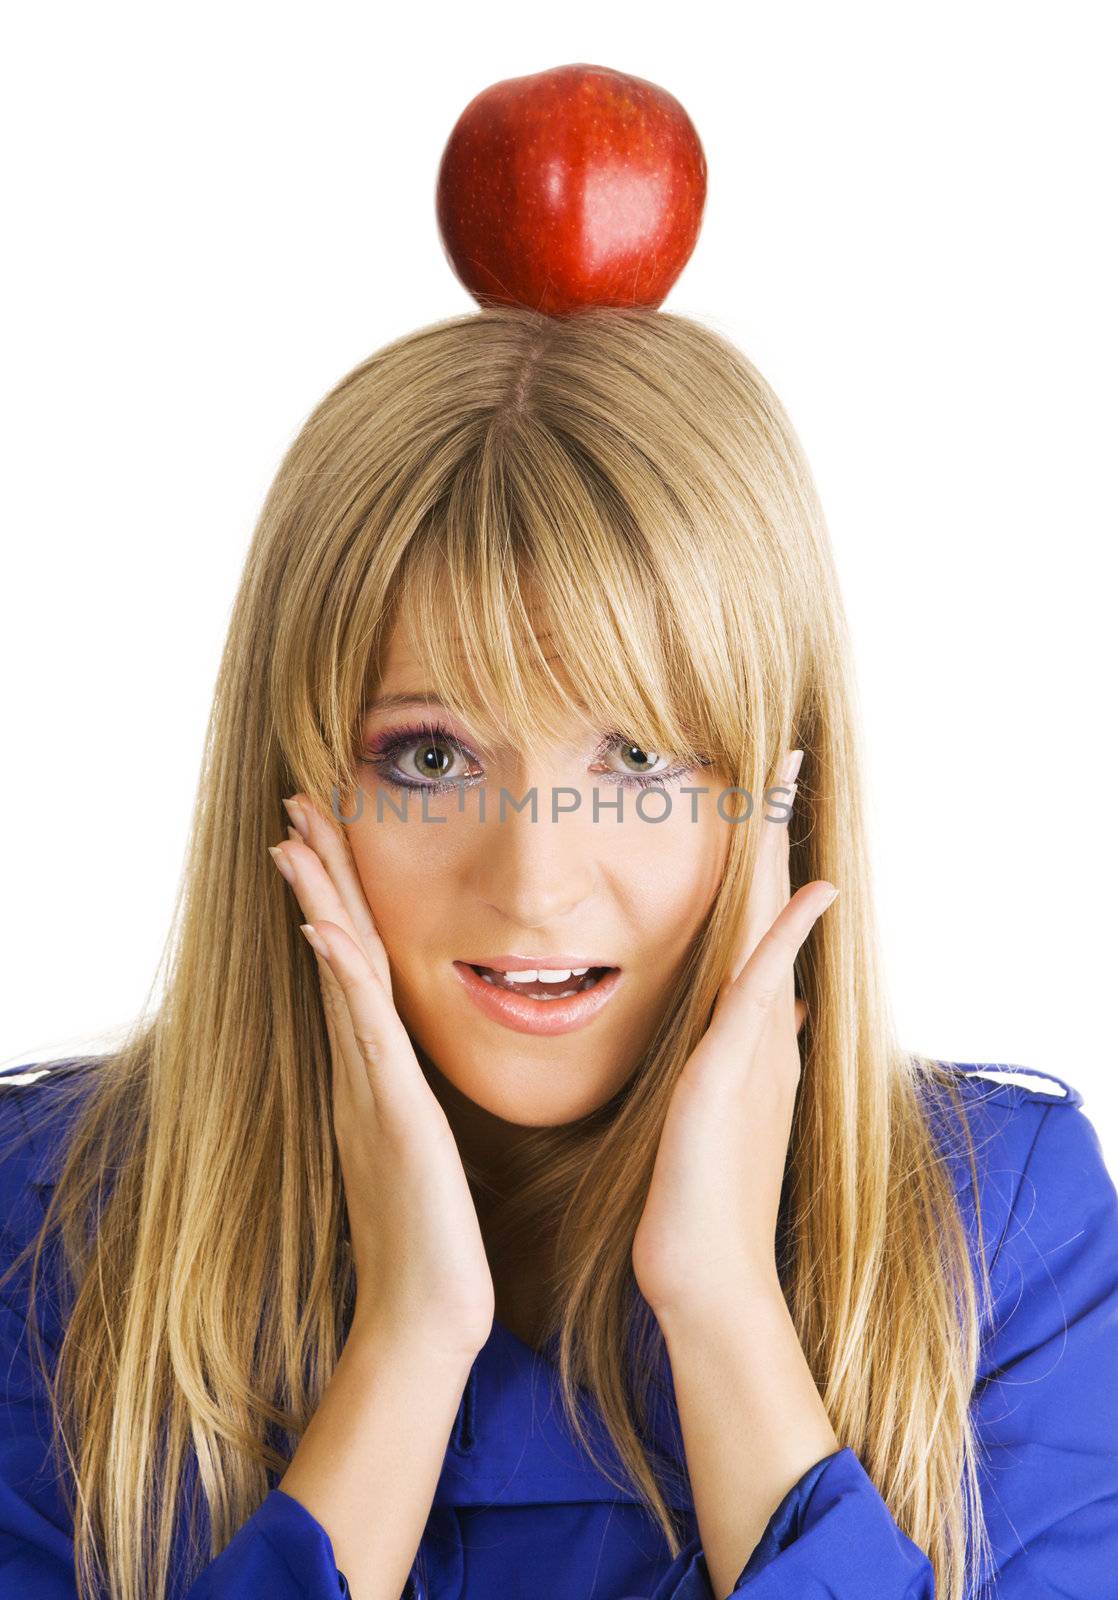 Funny frightened young woman with an apple on her head